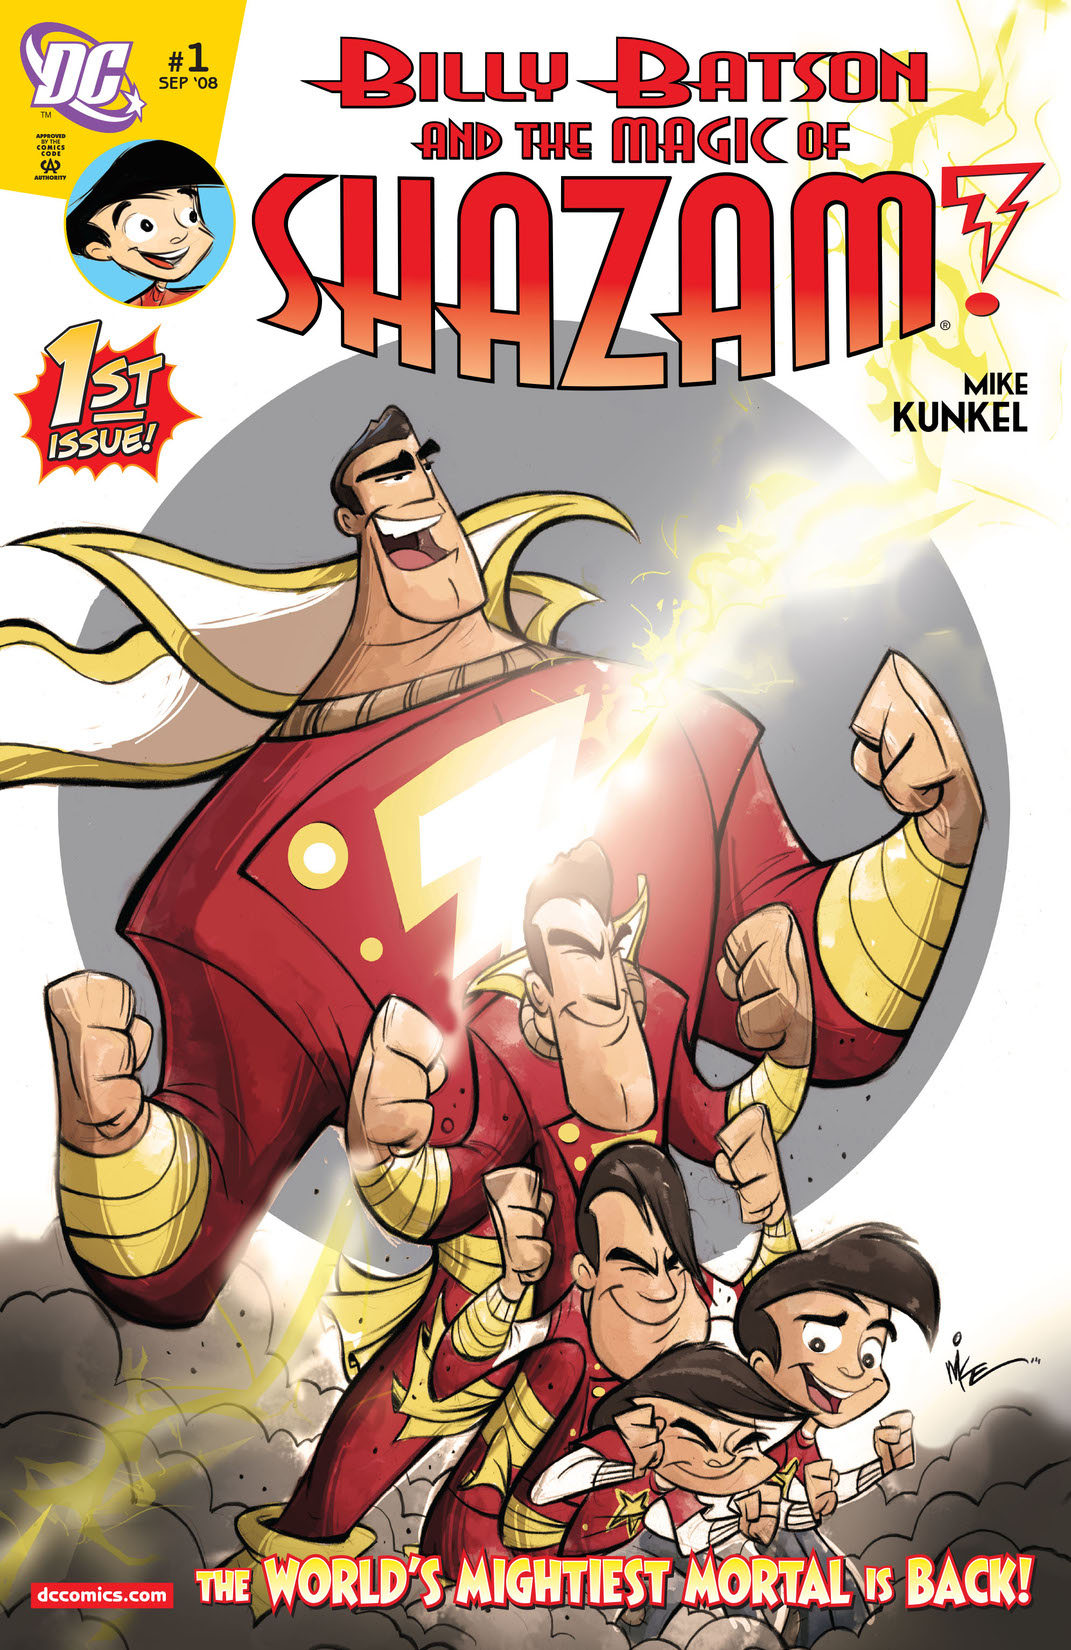 Billy Batson & the Magic of Shazam! #1 preview images